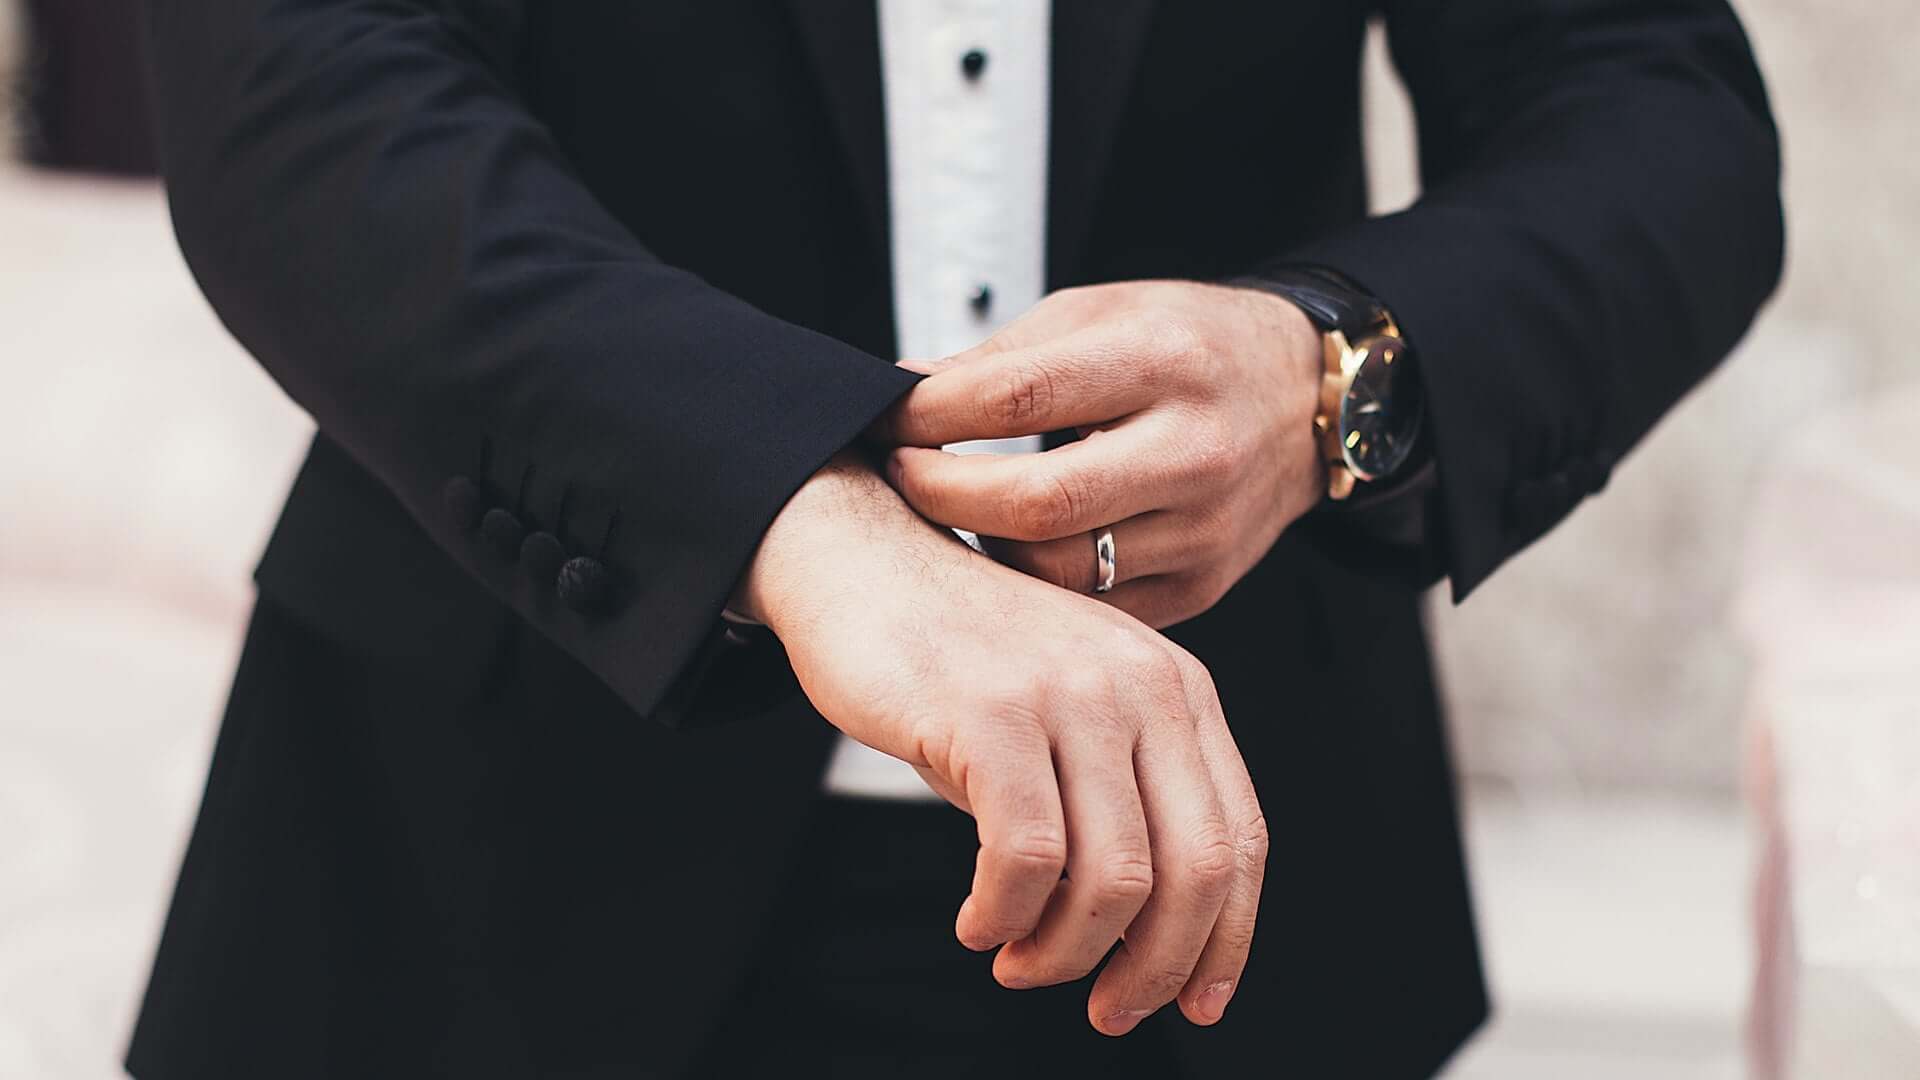 Close-up shot of a man in a black suit adjusting his wrist cuffs.